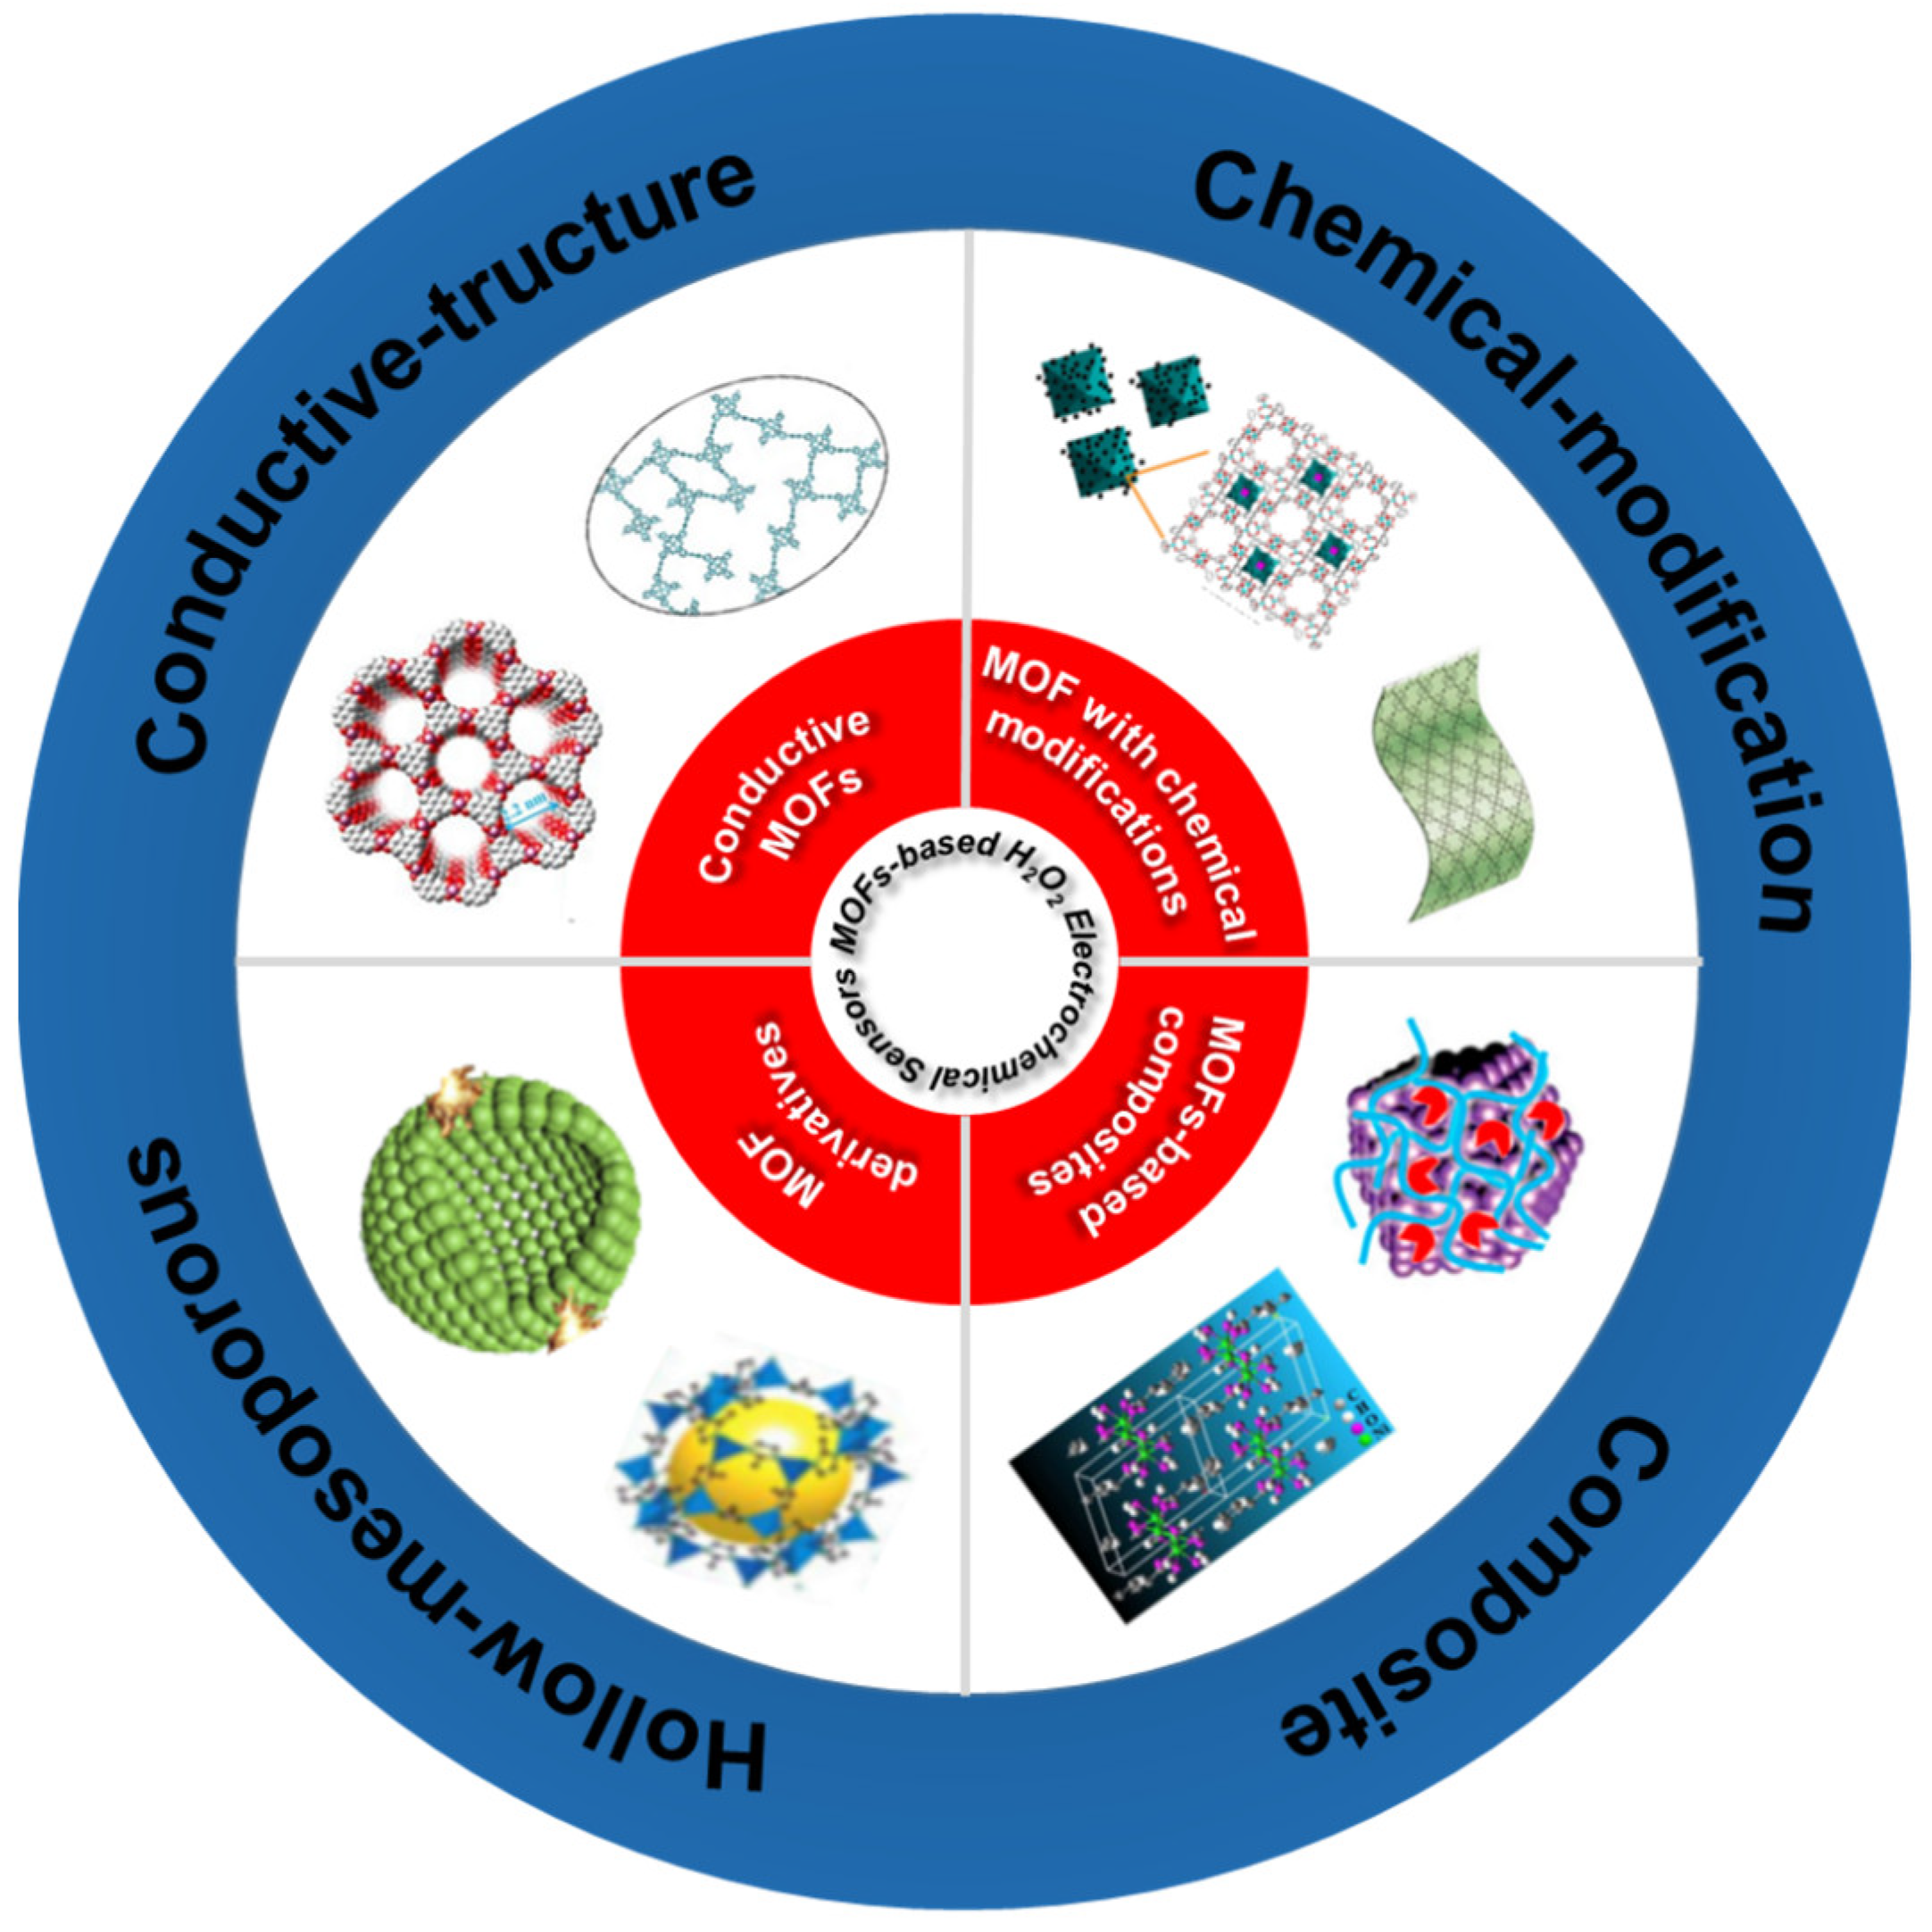 Metal‐Organic‐Framework‐Based Cathodes for Enhancing the Electrochemical  Performances of Batteries: A Review - Wang - 2019 - ChemElectroChem - Wiley  Online Library